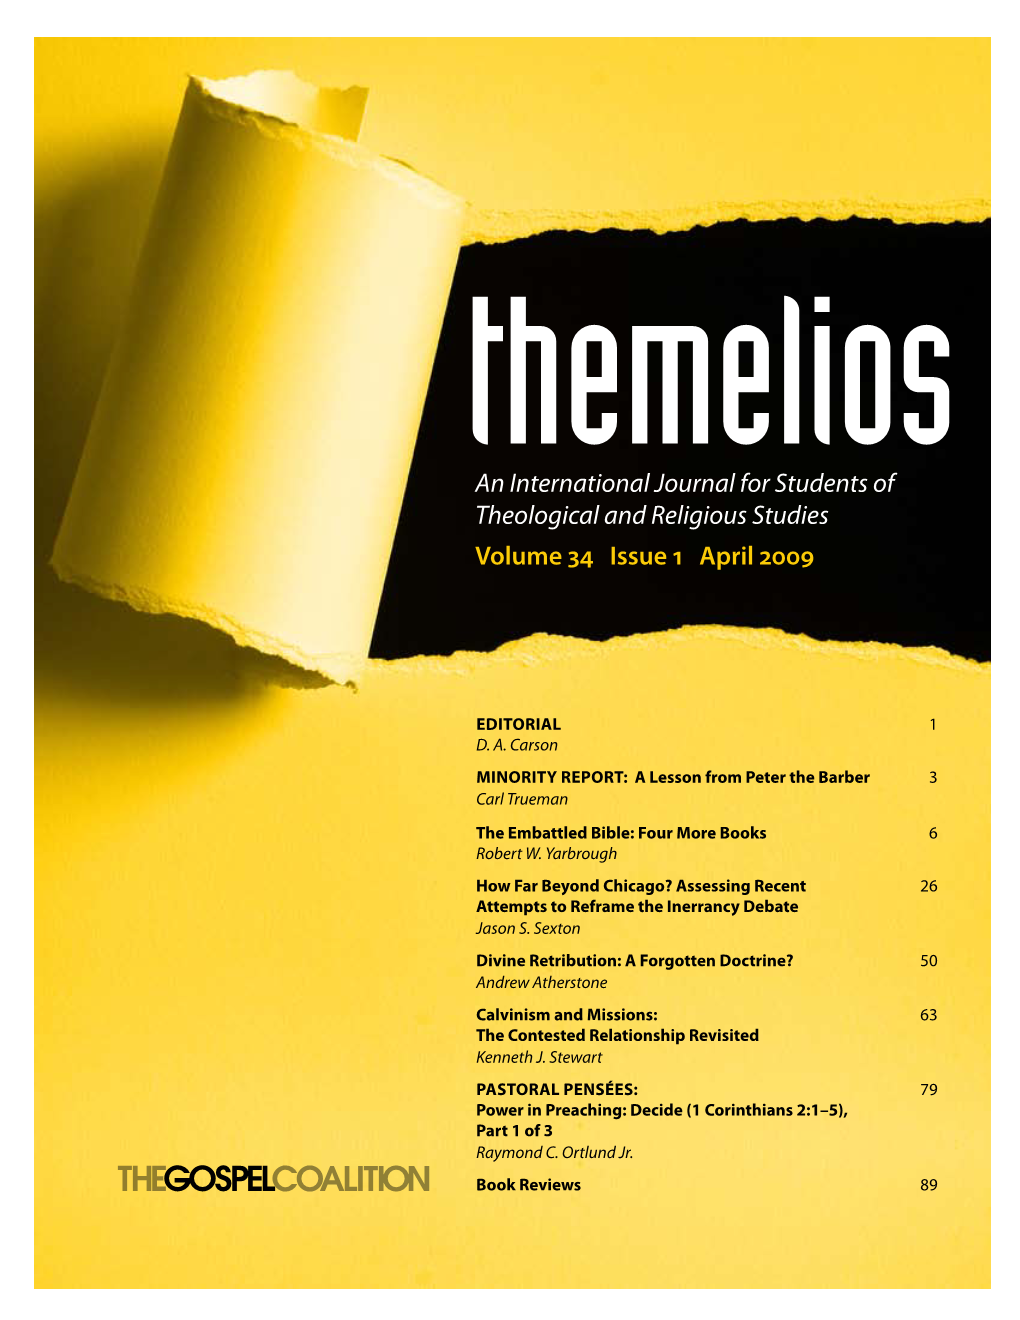 An International Journal for Students of Theological and Religious Studies Volume 34 Issue 1 April 2009